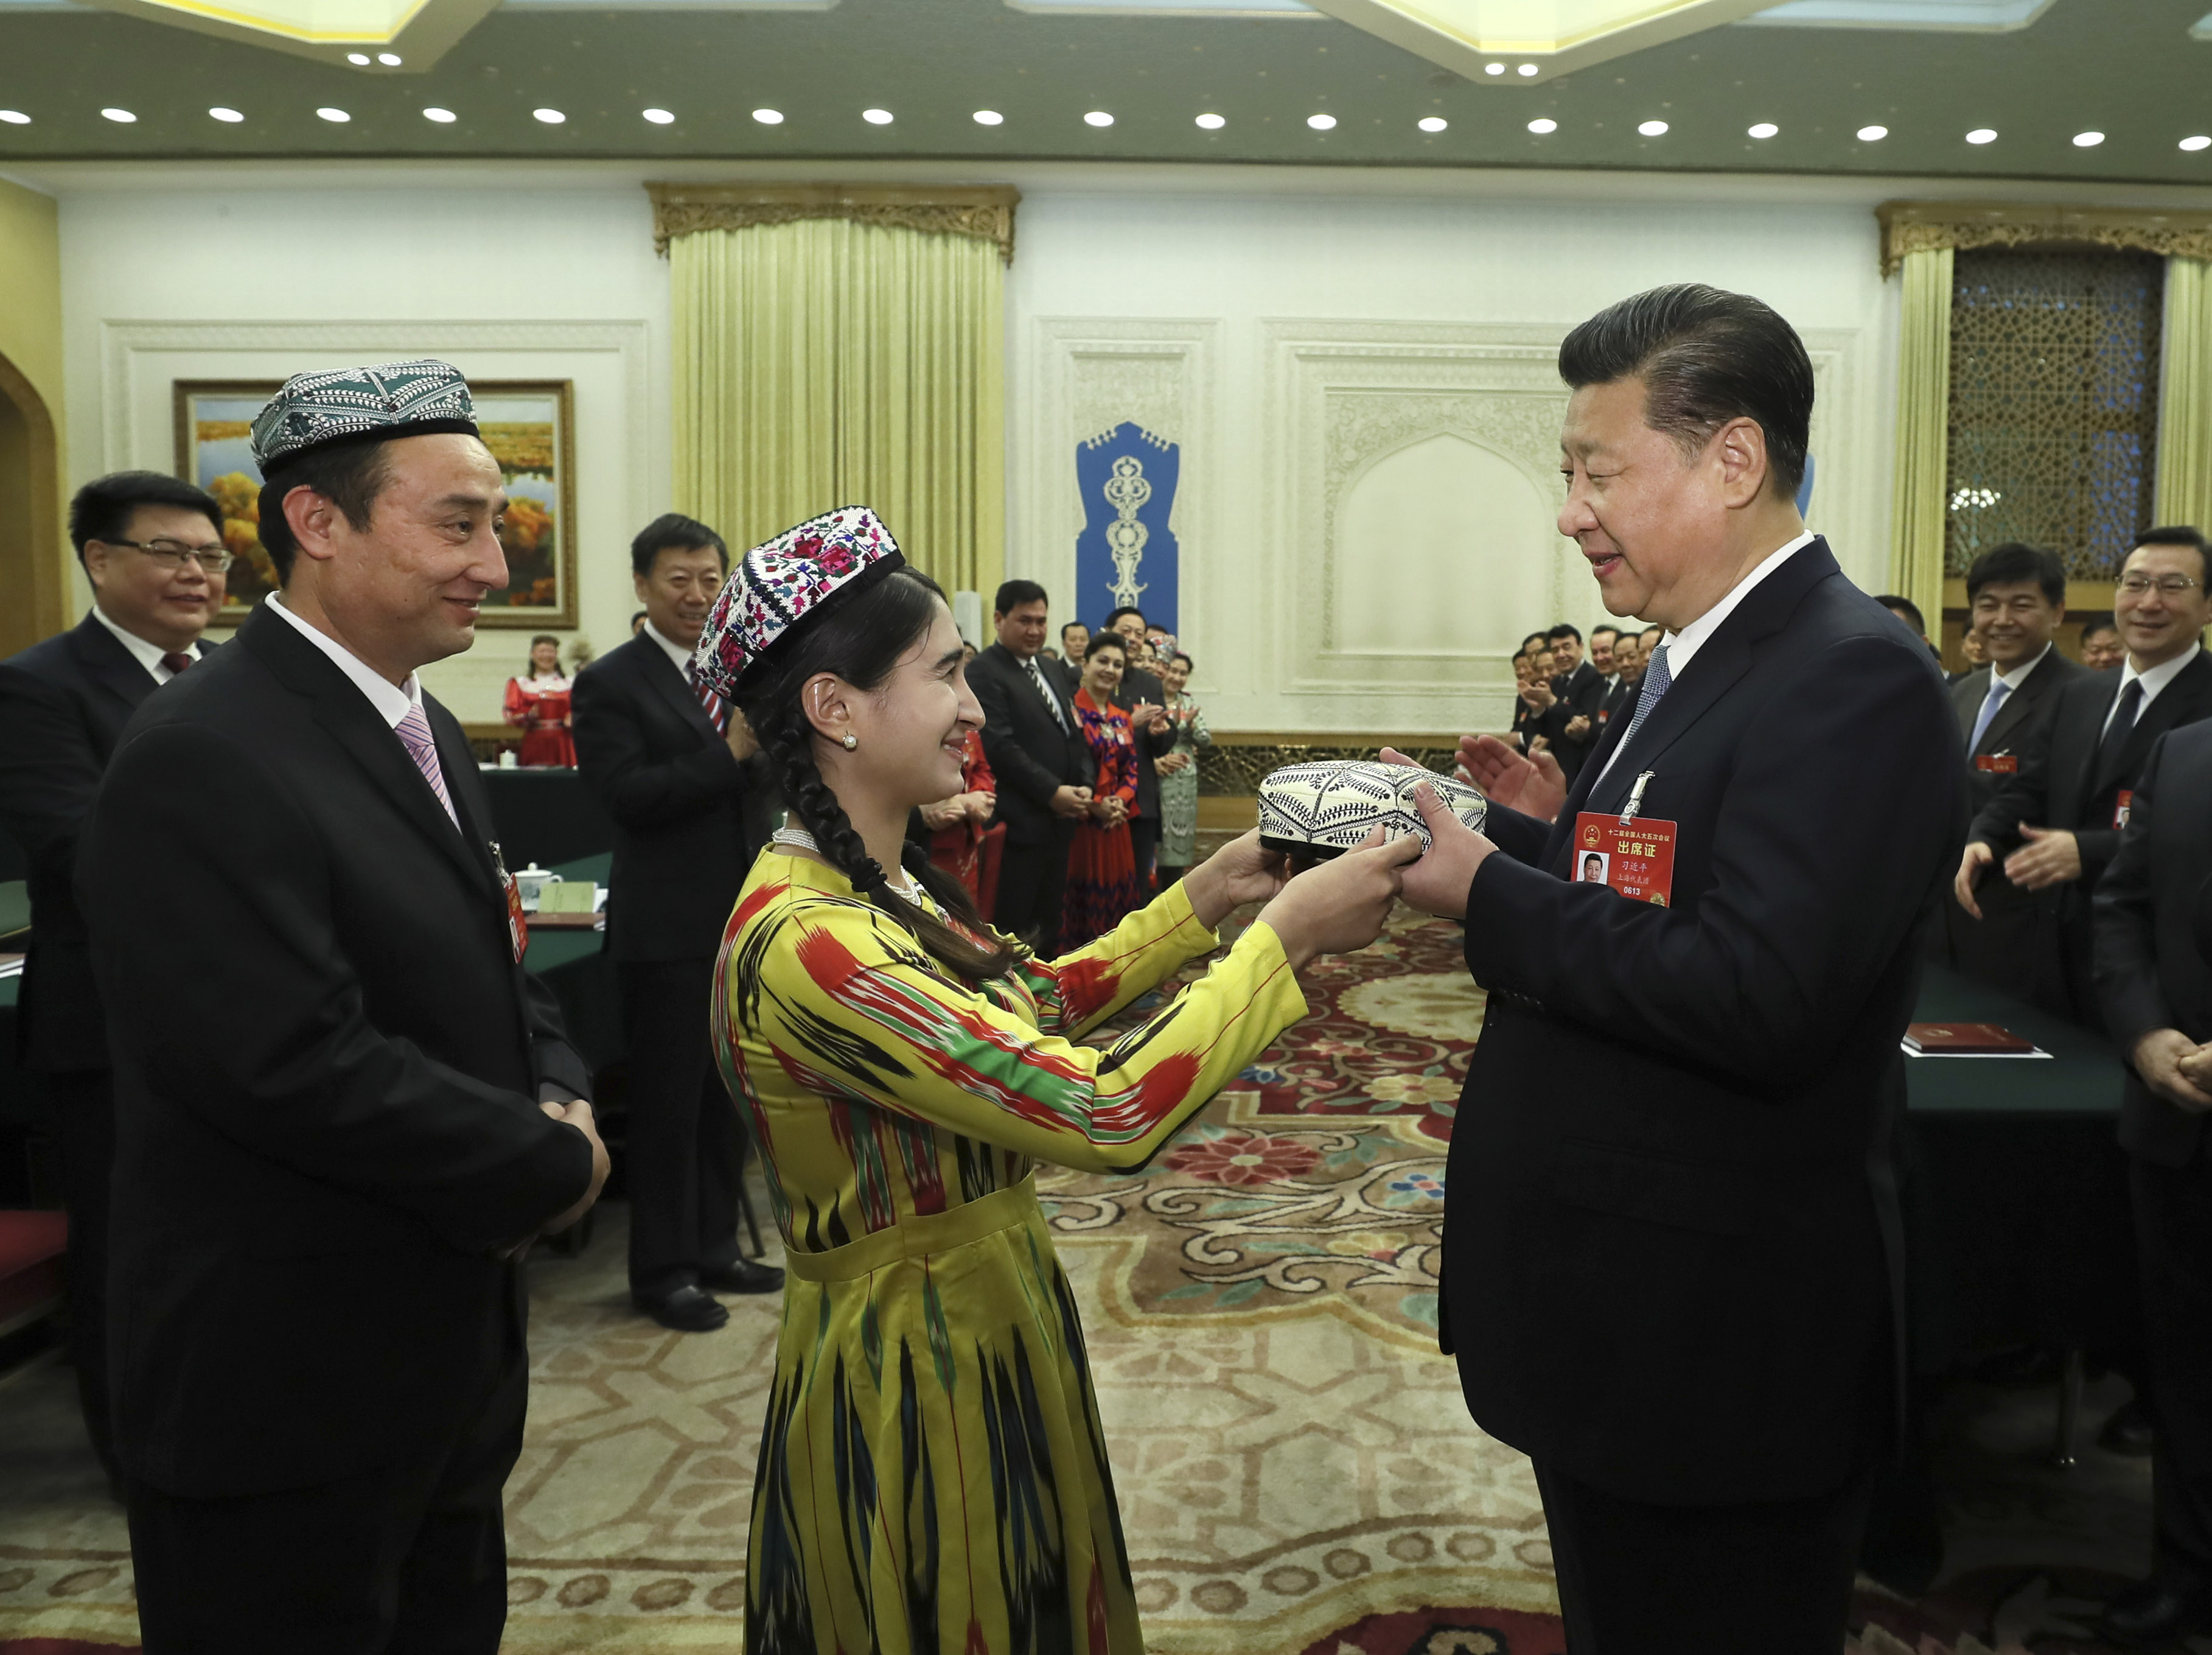 Chinese President Xi Jinping receives a gift from a national lawmaker from Xinjiang during a panel discussion at the ongoing annual session of the National People's Congress. [Photo: Xinhua/Lan Hongguang, Li Tao and Ma Zhancheng]